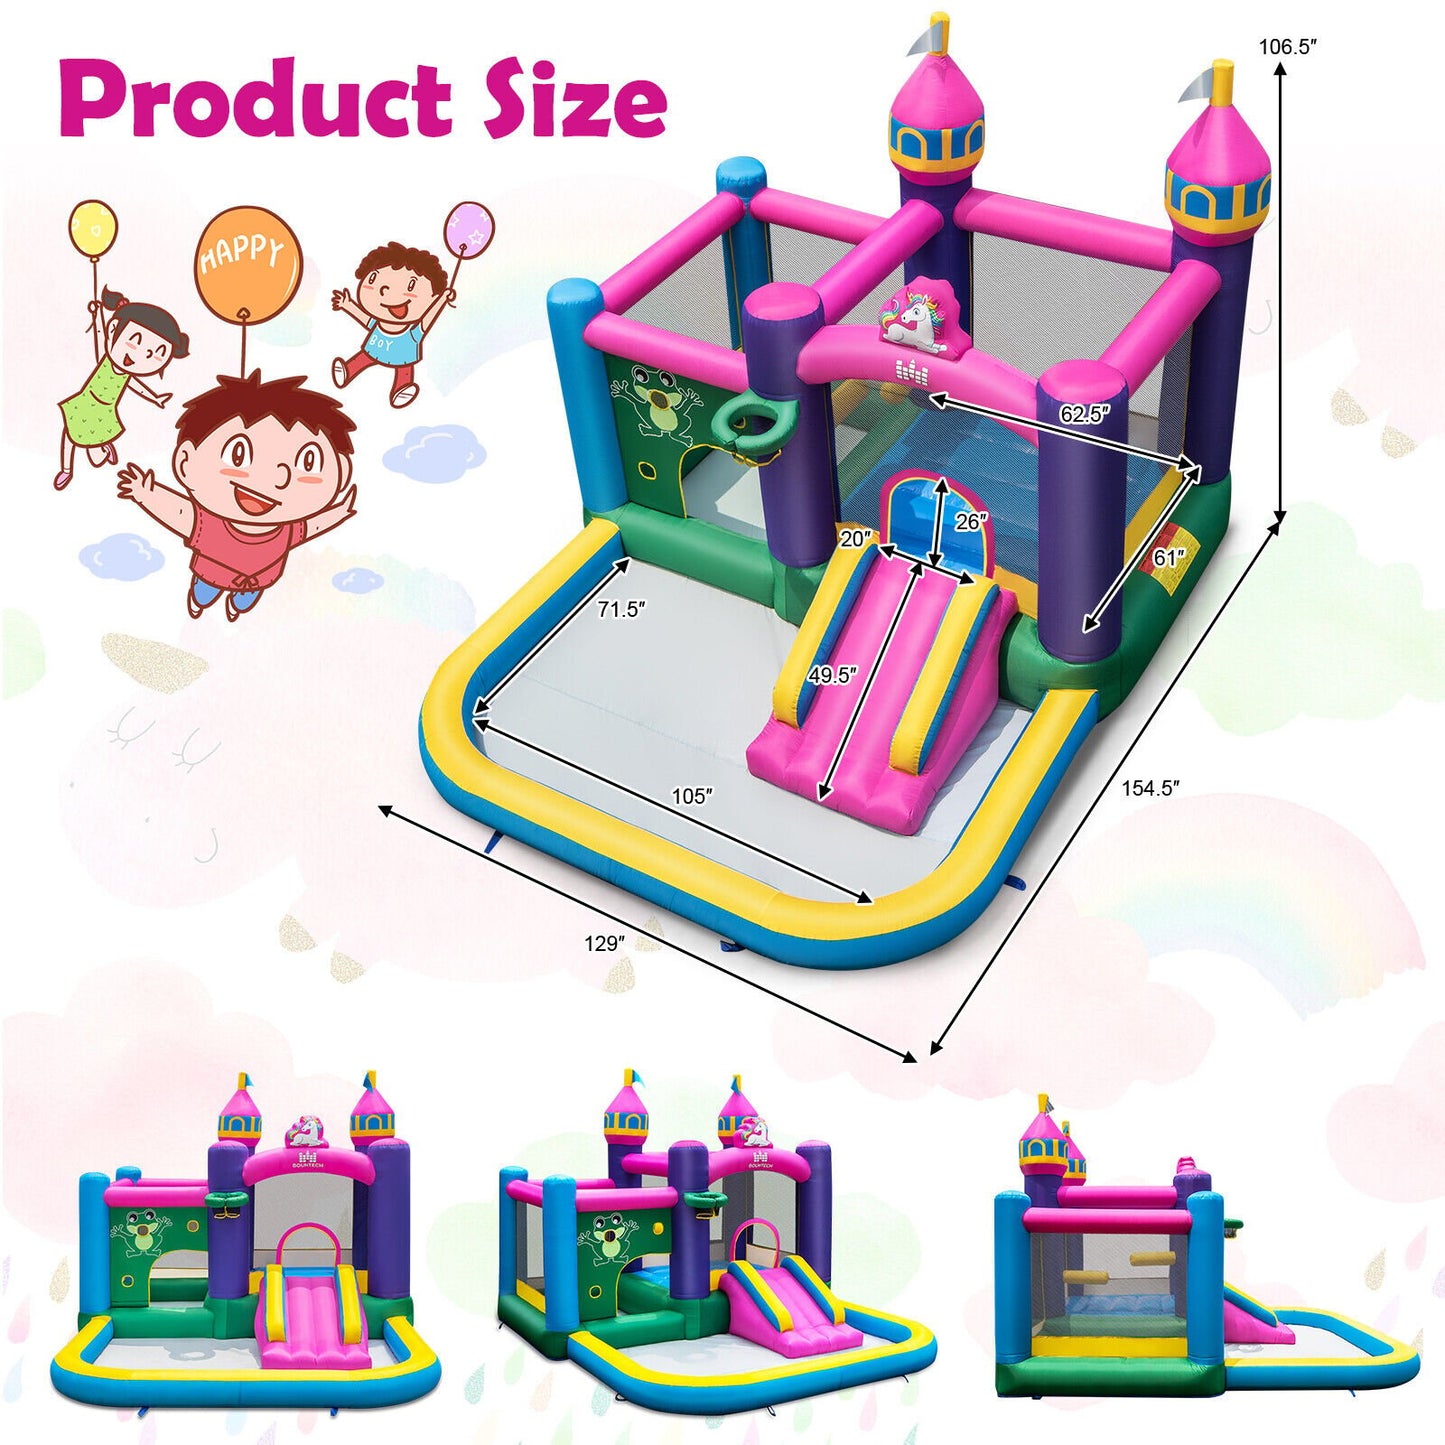 6-in-1 Kids Inflatable Unicorn-themed Bounce House with 735W Blower - Gallery Canada